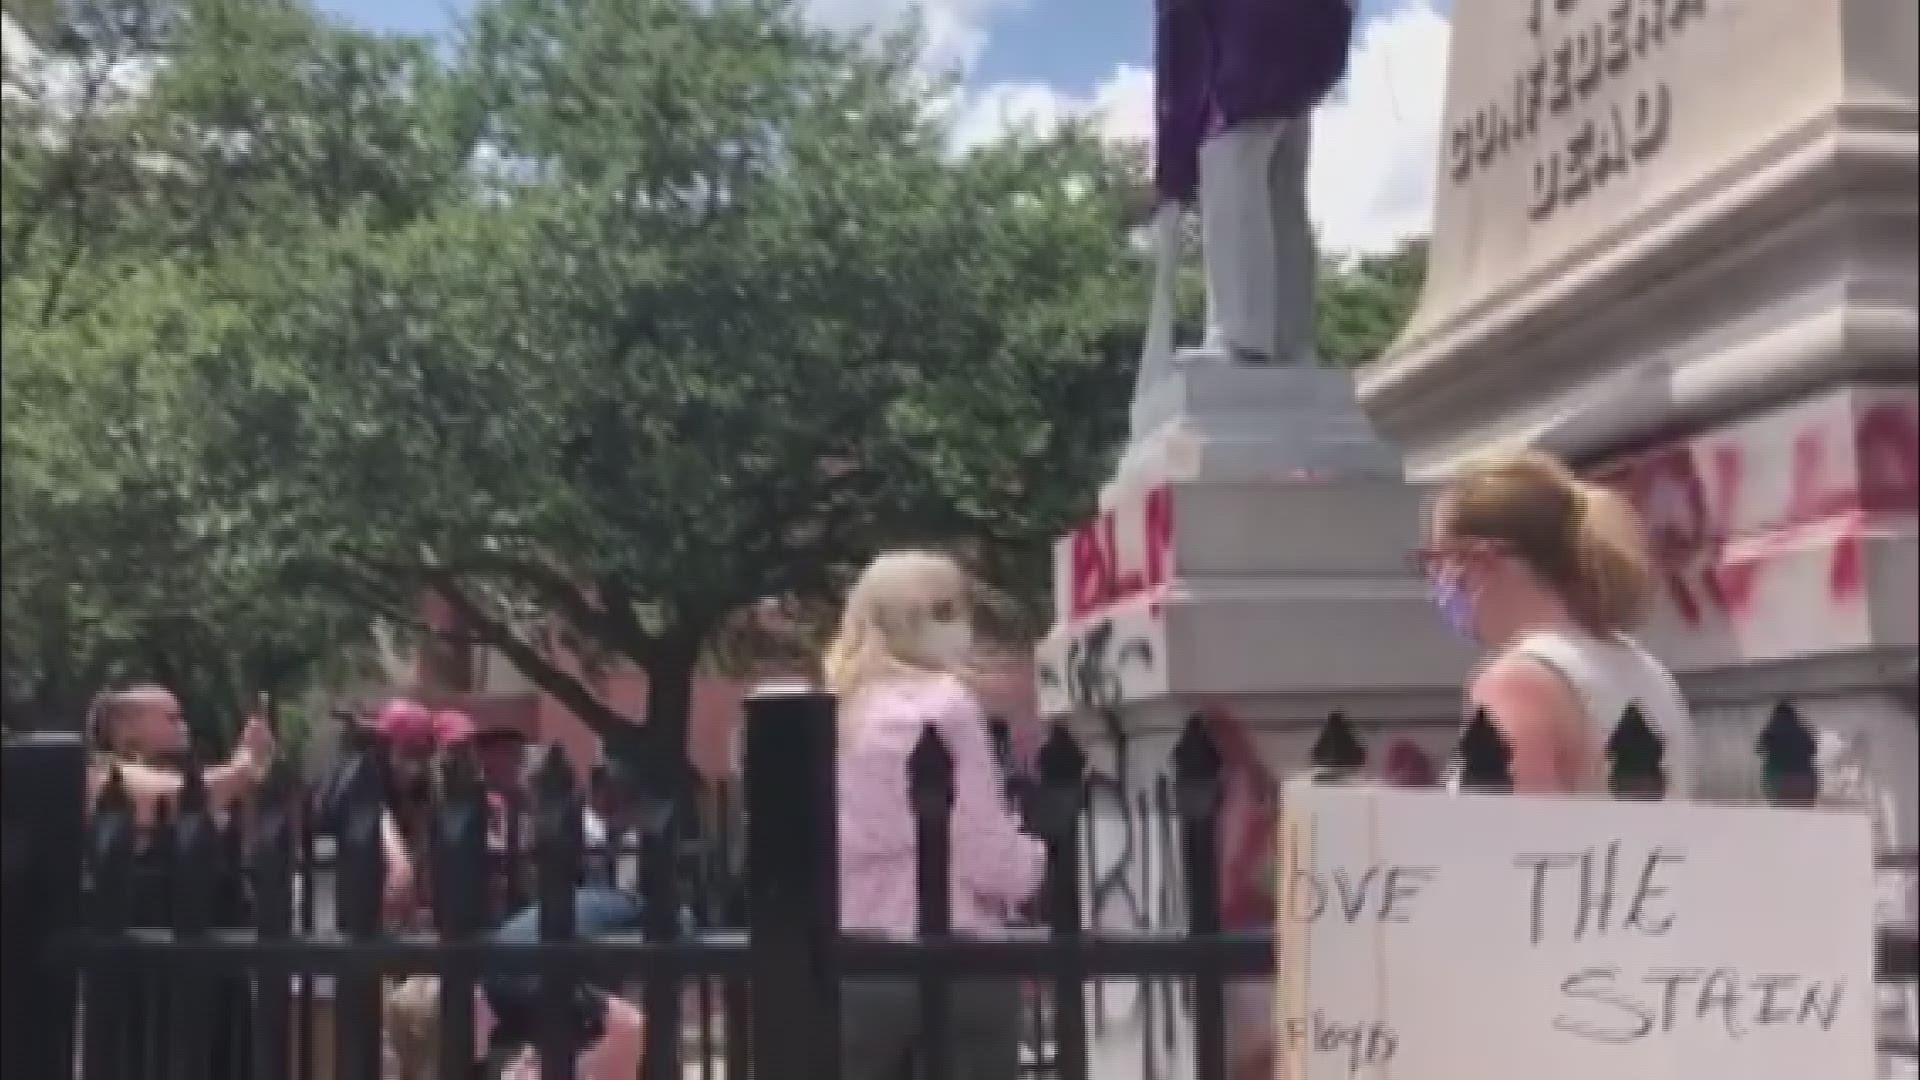 Some people who gathered to protest in Olde Towne Portsmouth on June 10, 2020 spray-painted a number of things on the Confederate monument.